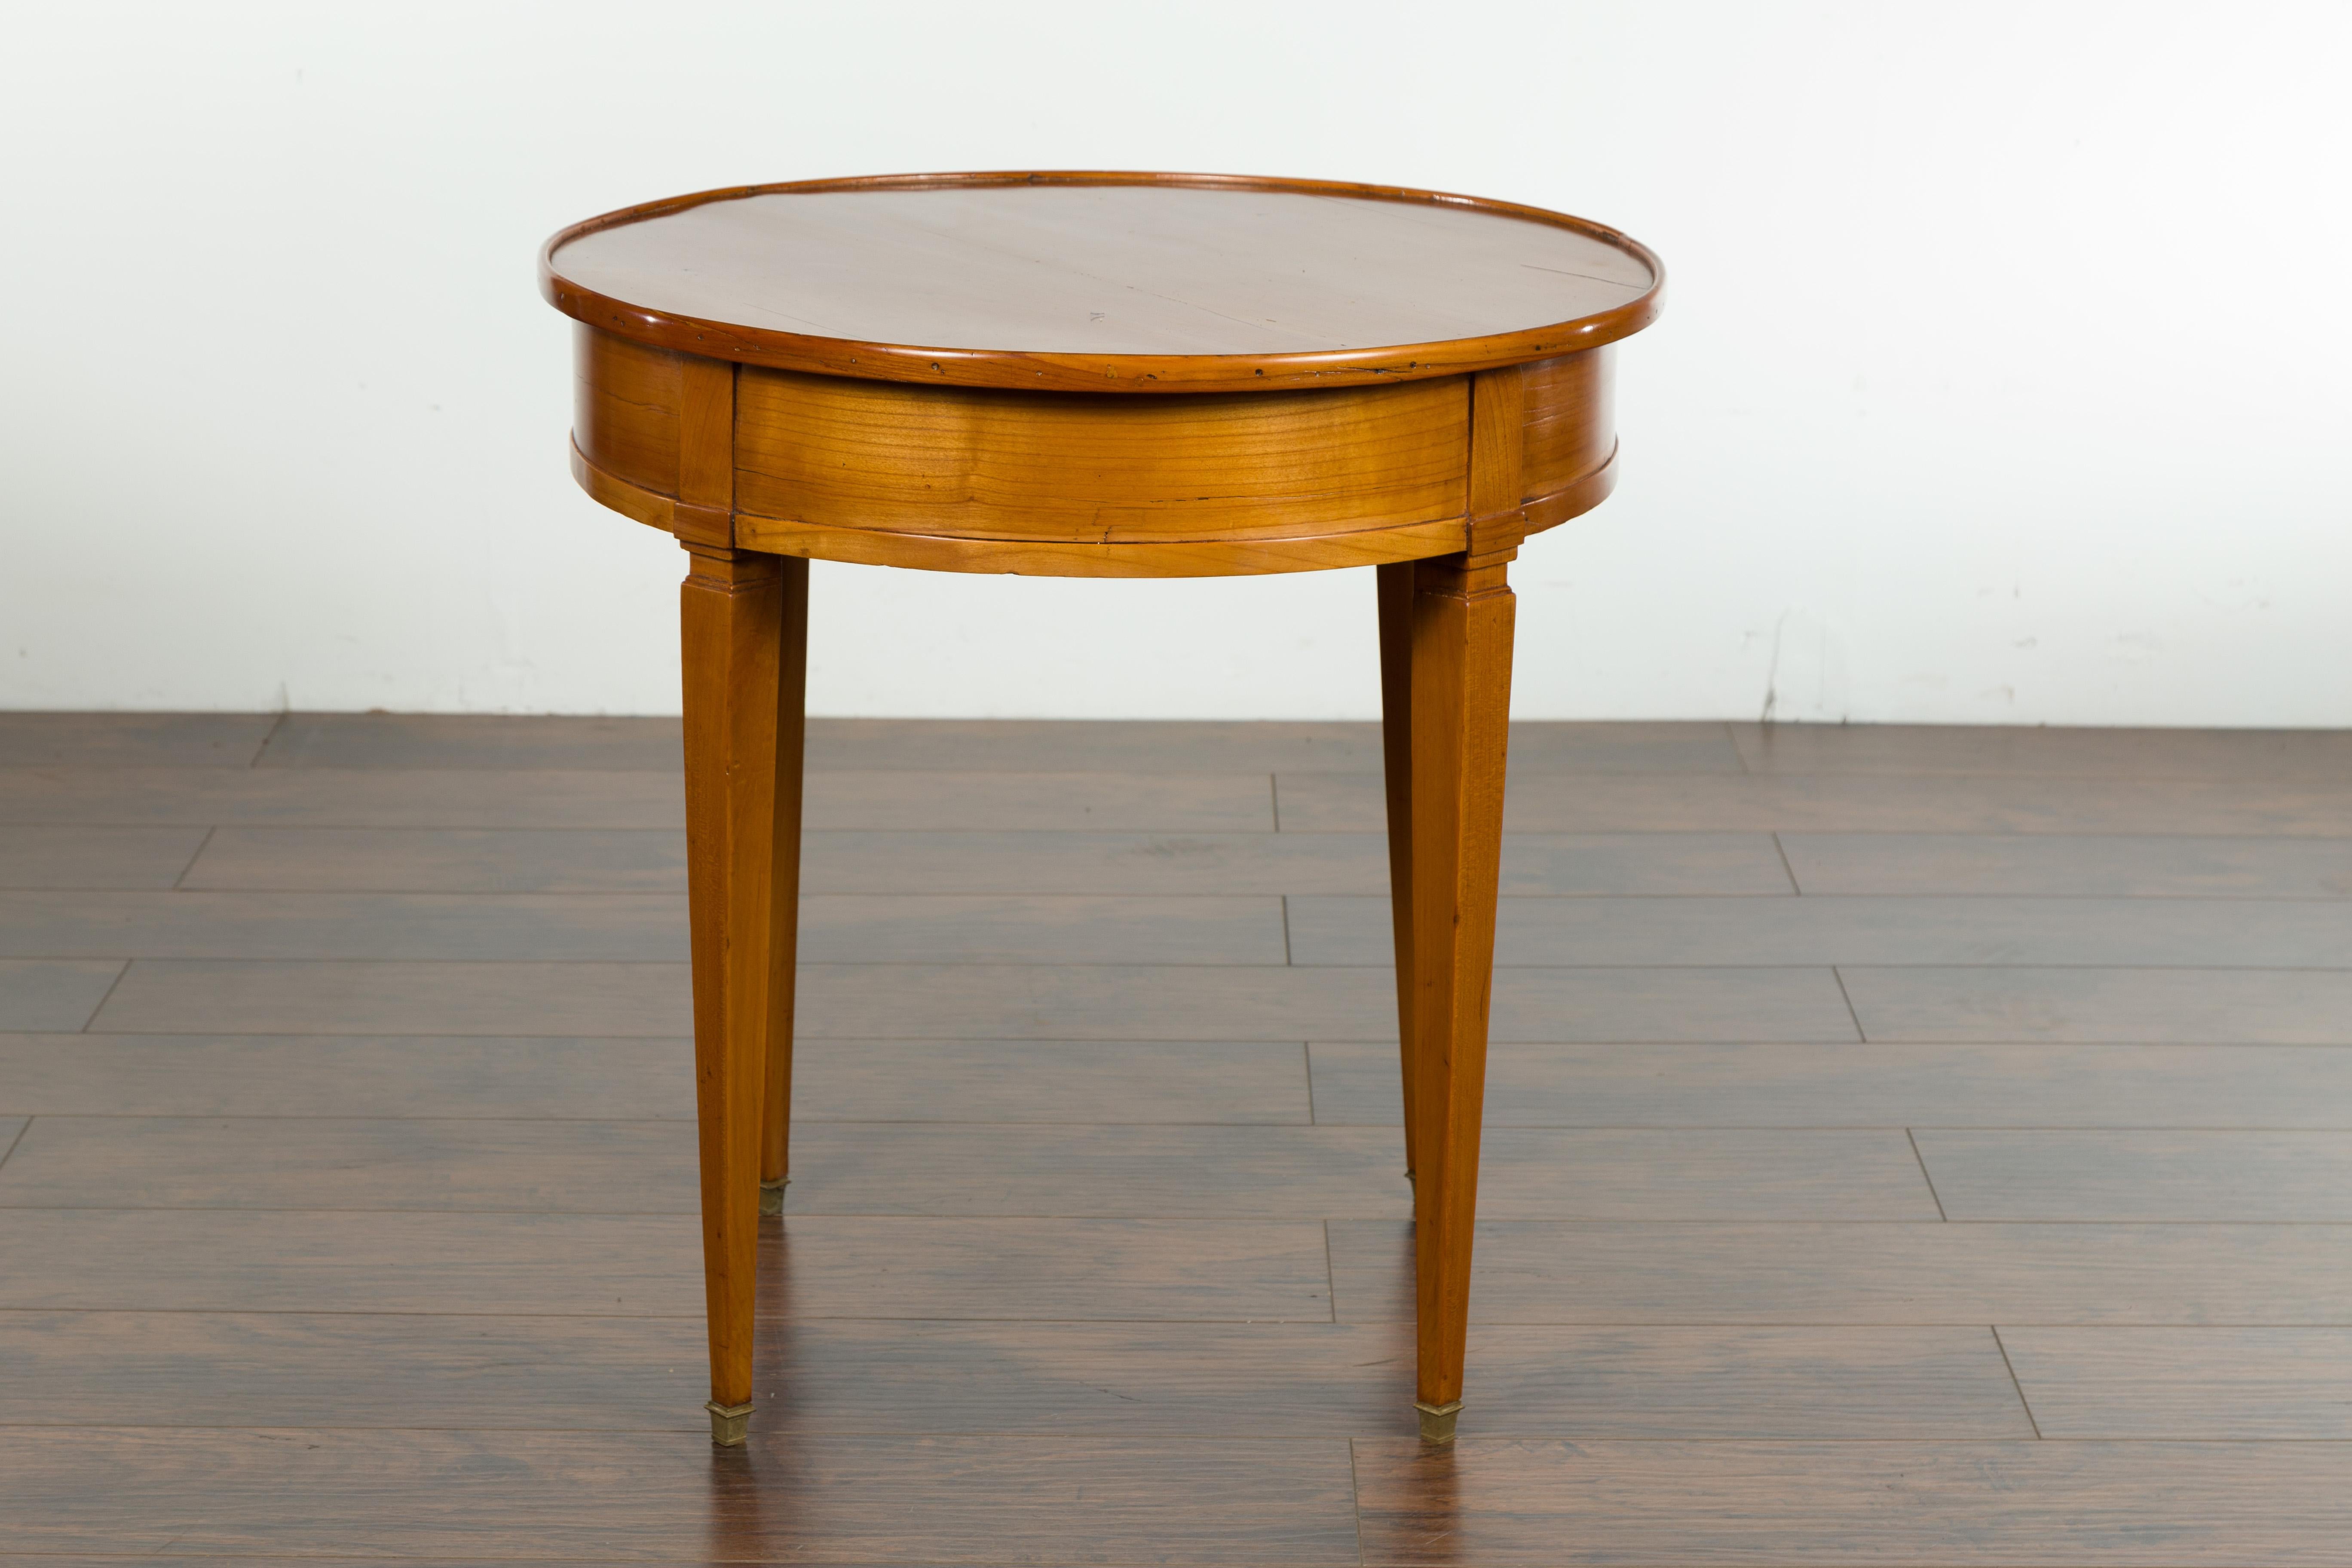 French Napoléon III 1850s Walnut Side Table with Single Drawer and Tapered Legs For Sale 5